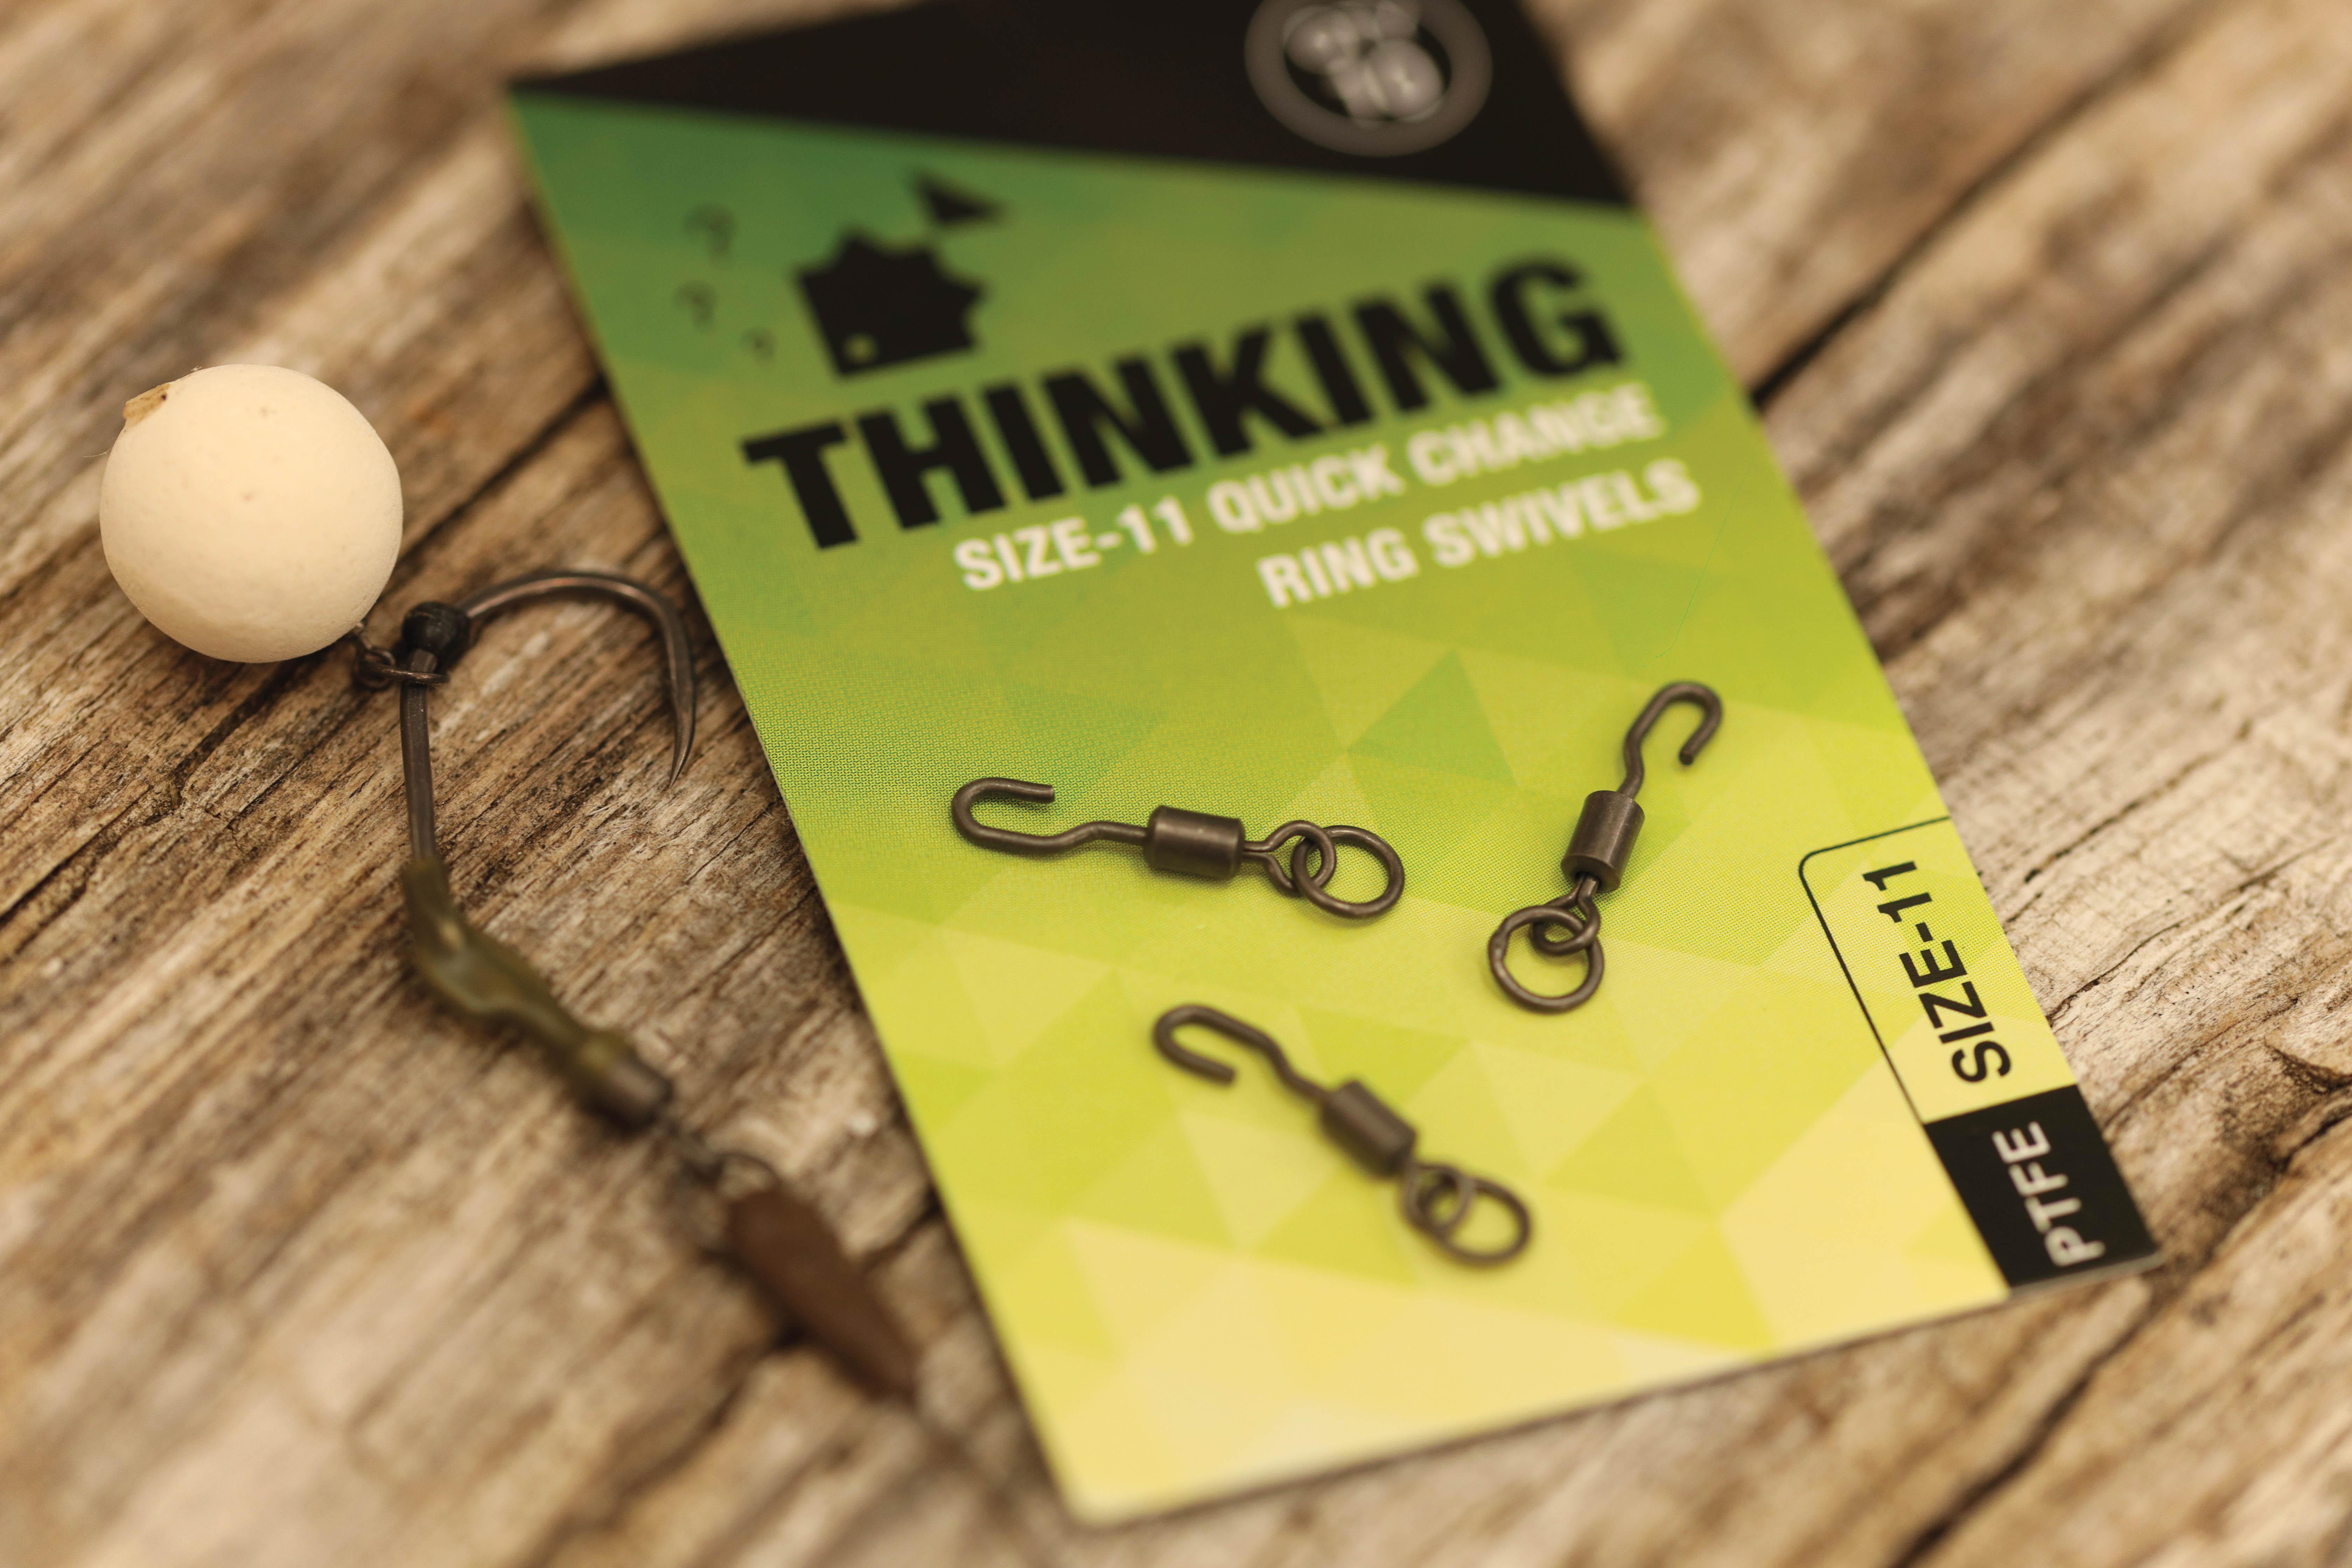 Angling4Less - Thinking Anglers PTFE Swivels